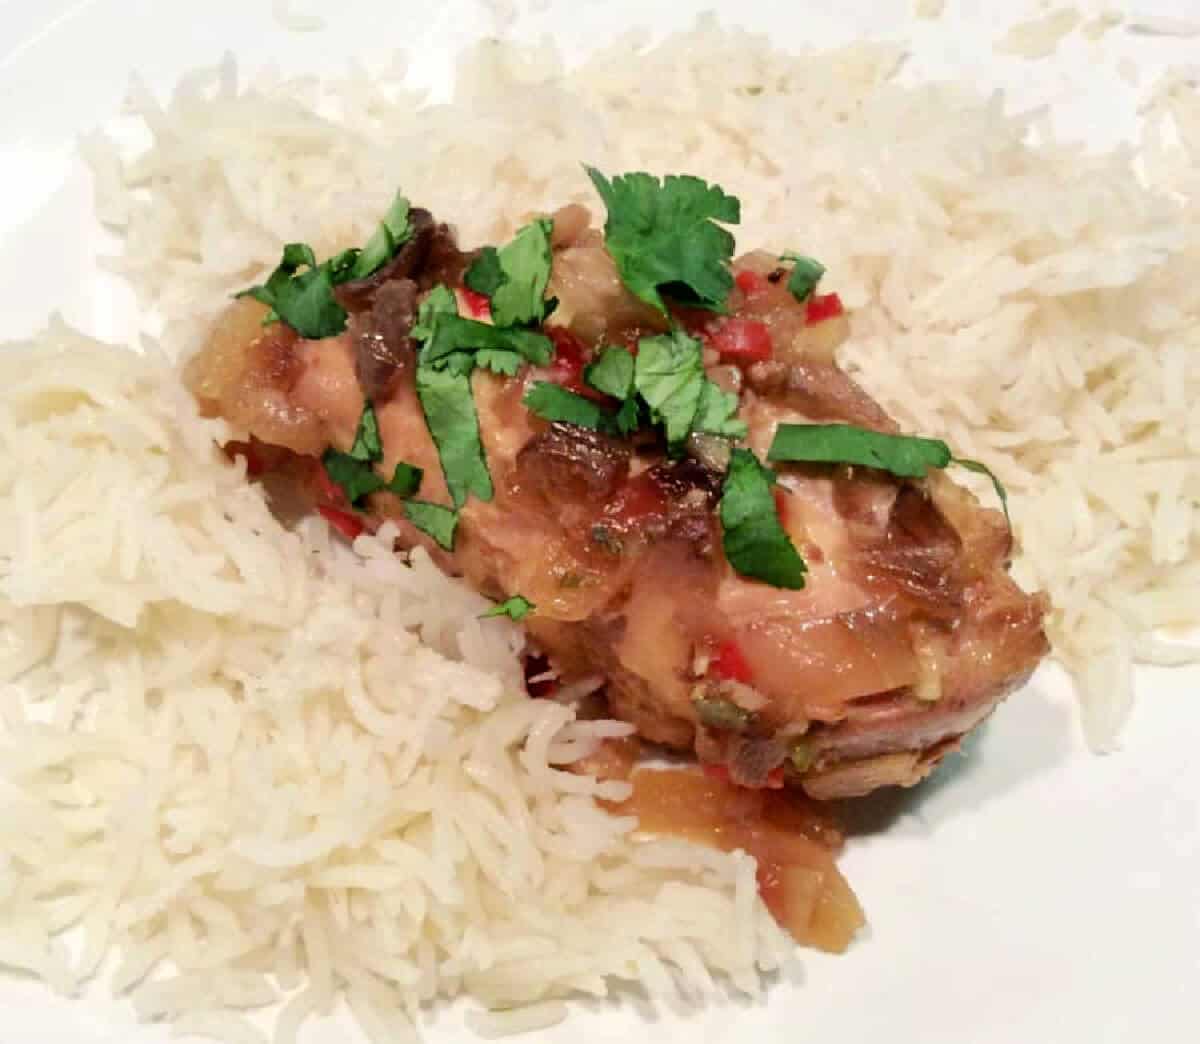 Chilli lime chicken with rice on white plate, with coriander garnish.